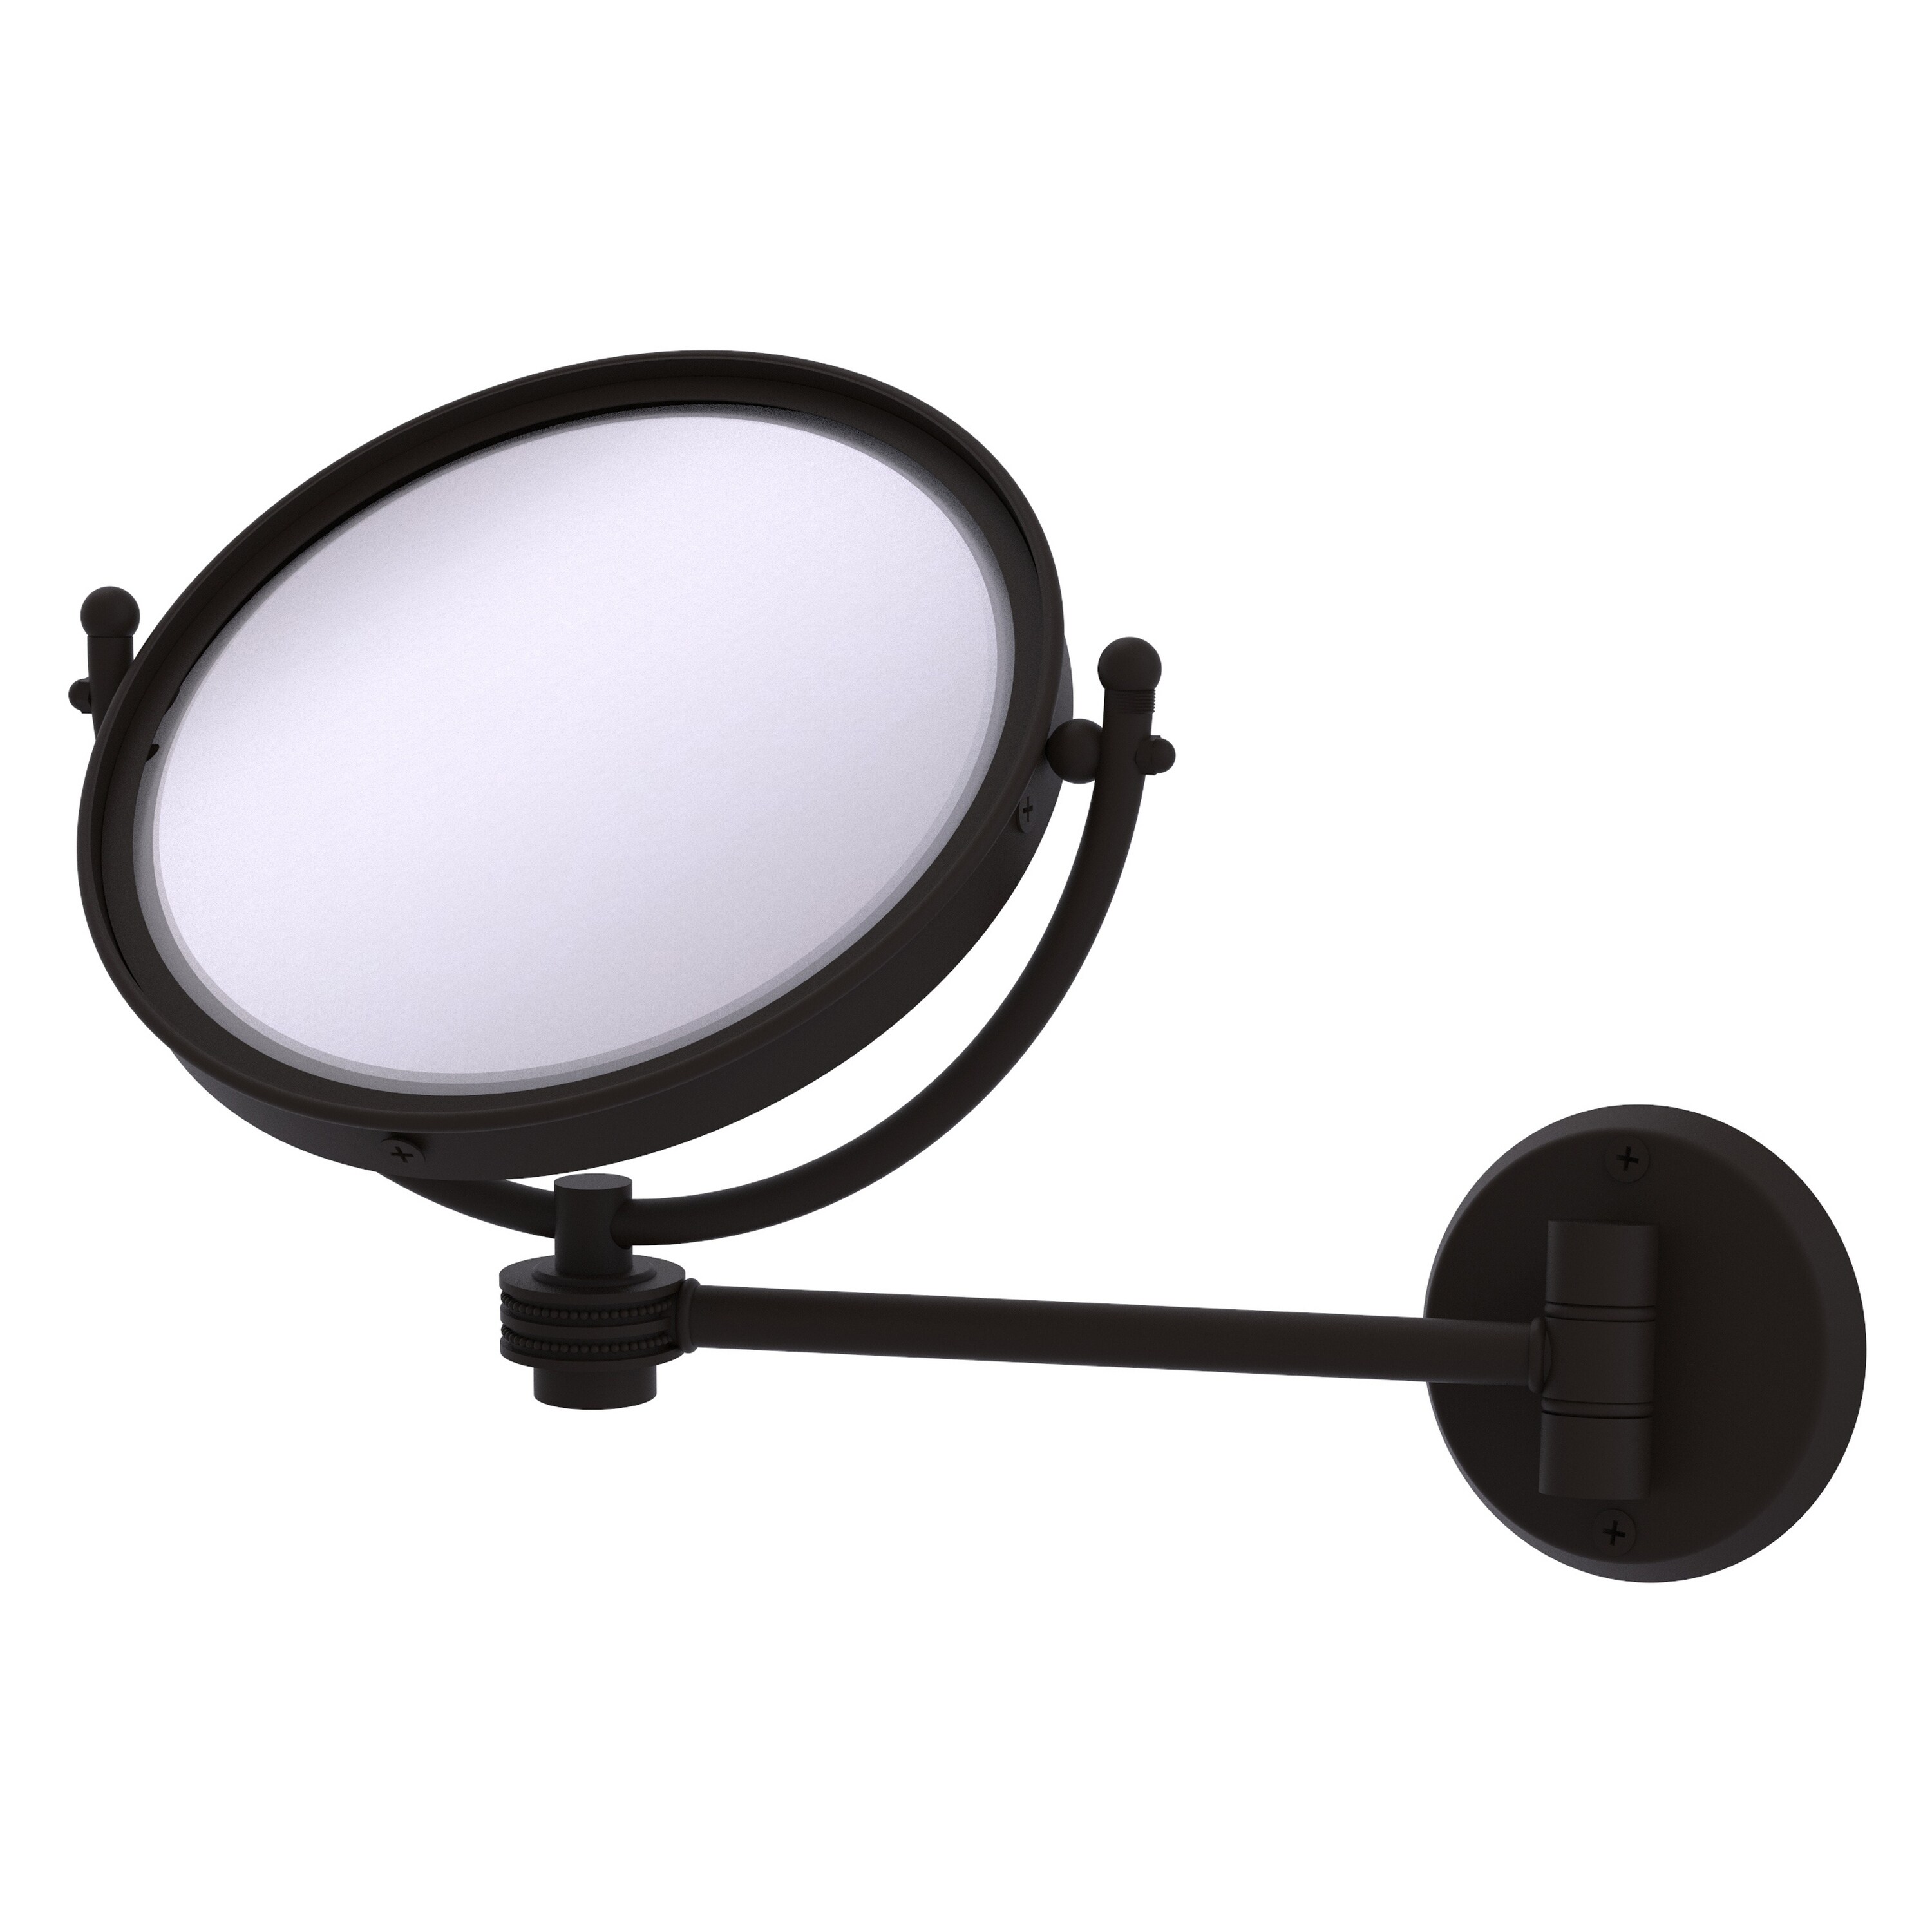 8-in x 10-in Oil-Rubbed Chrome Double-sided 5X Magnifying Wall-mounted Vanity Mirror | - Allied Brass WM-5D/5X-ORB